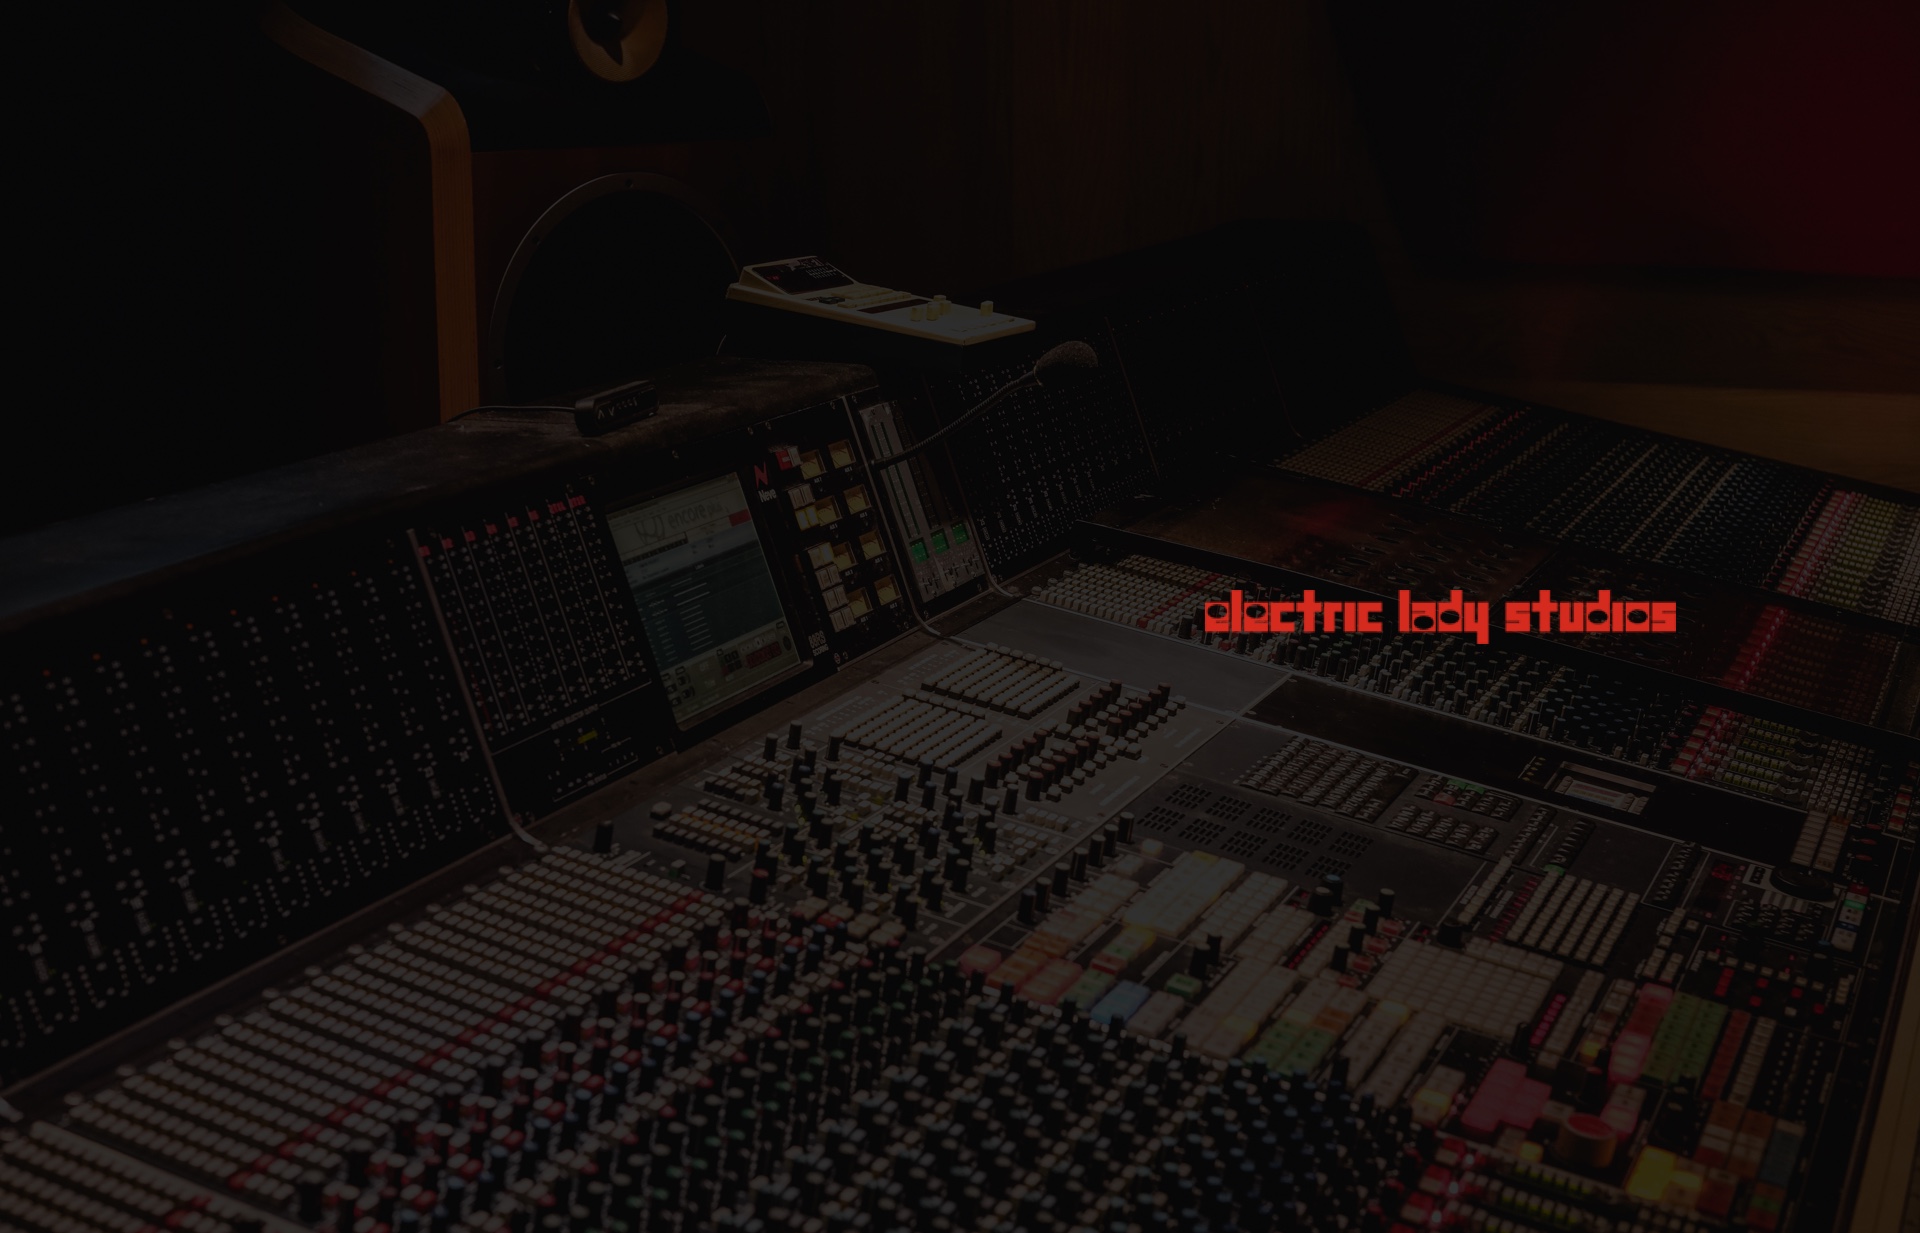 Electric Lady Studios - Personal Website